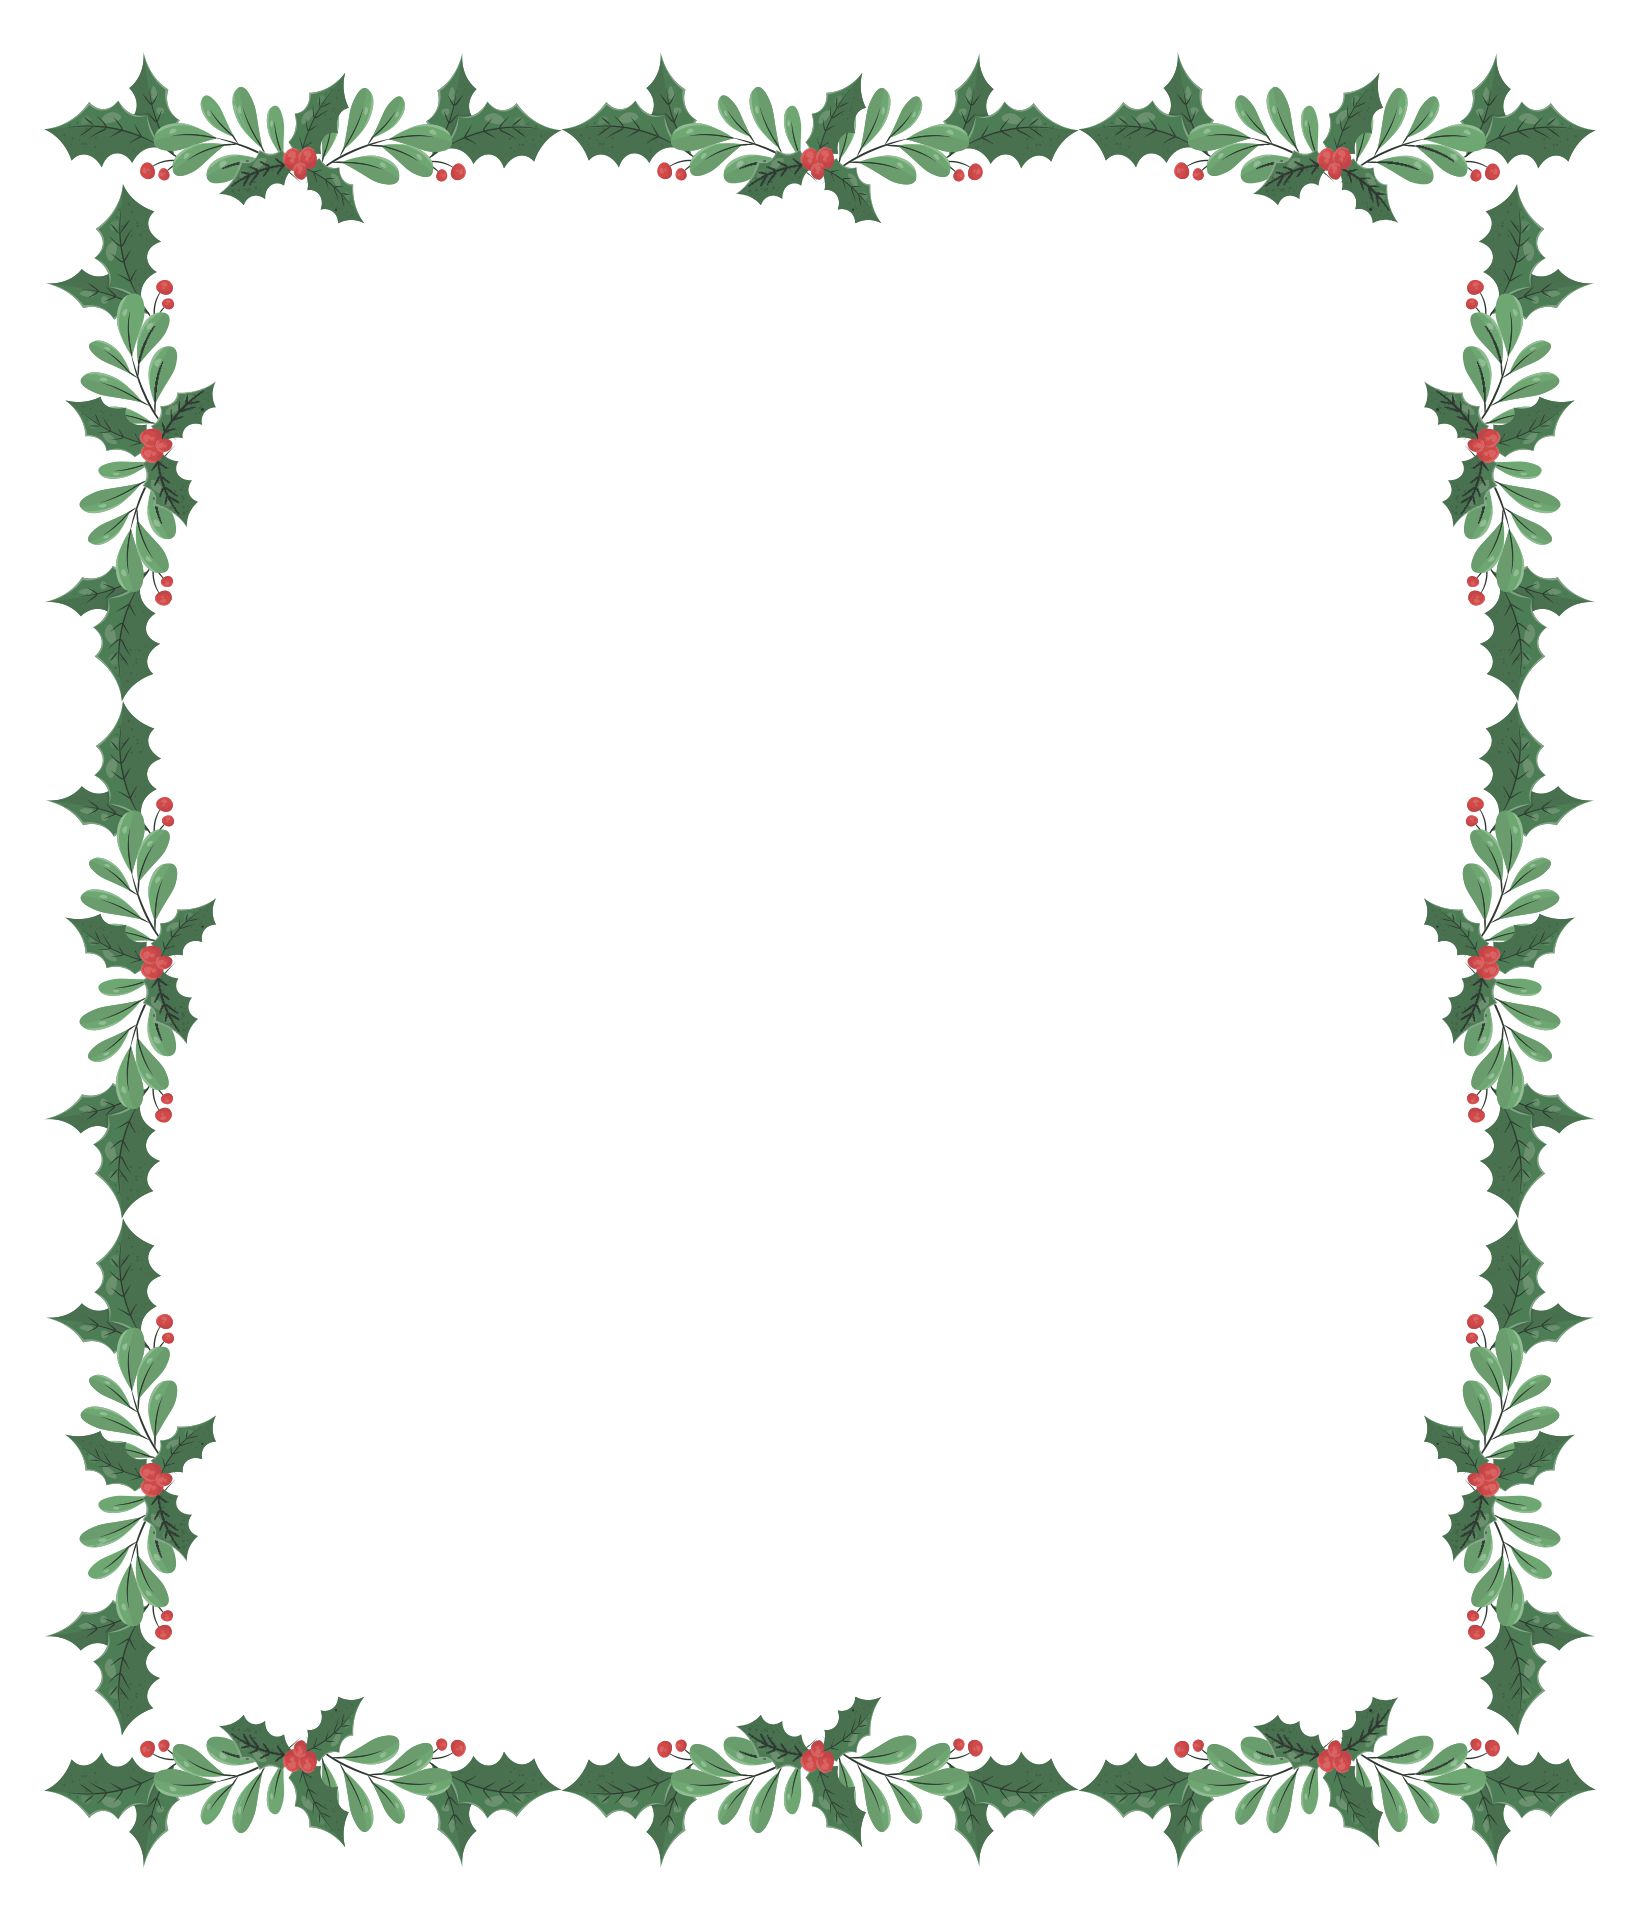 5 Best Images of Free Printable Christmas Border Templates - Free ...